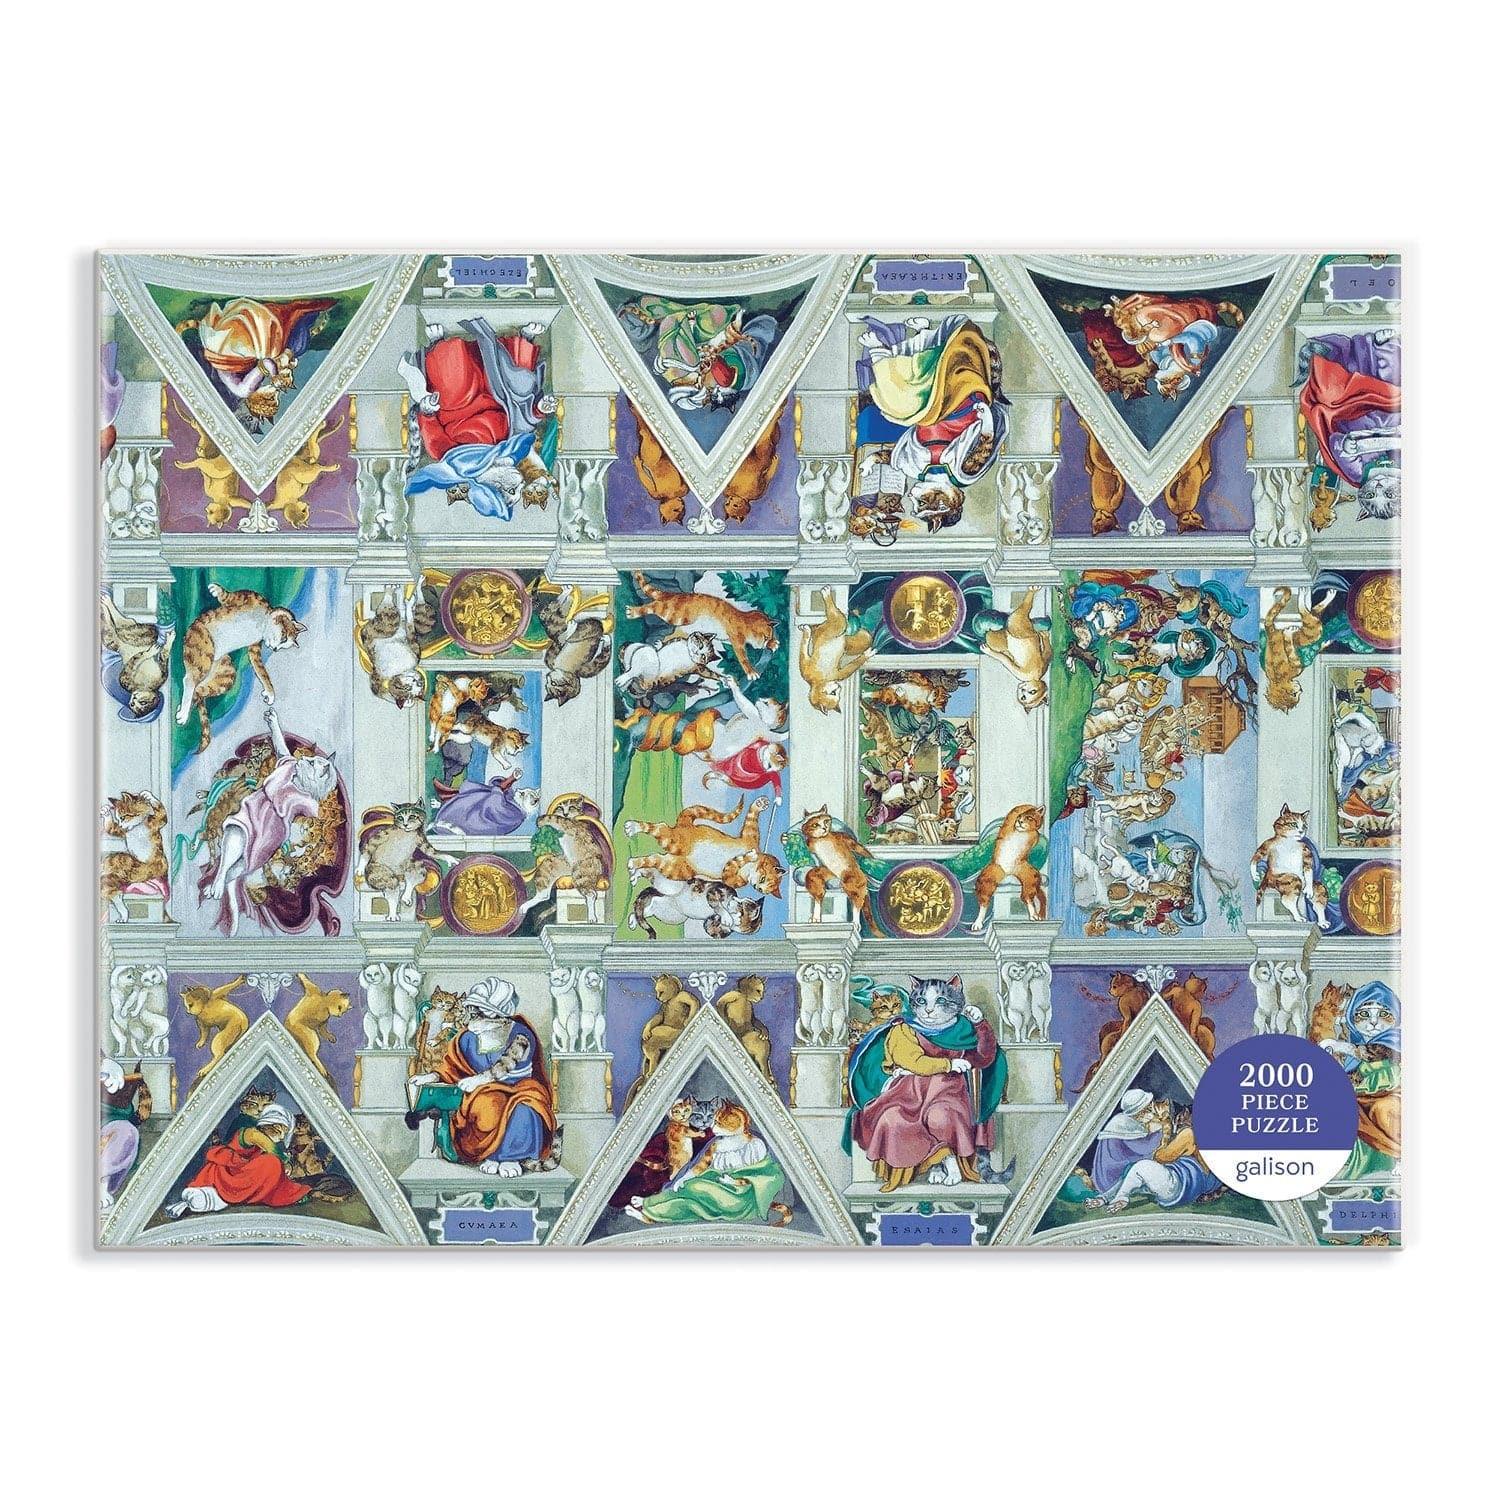 Sistine Chapel Ceiling Meowsterpiece of Western Art 2000 Piece Jigsaw Puzzle - MAIA HOMES